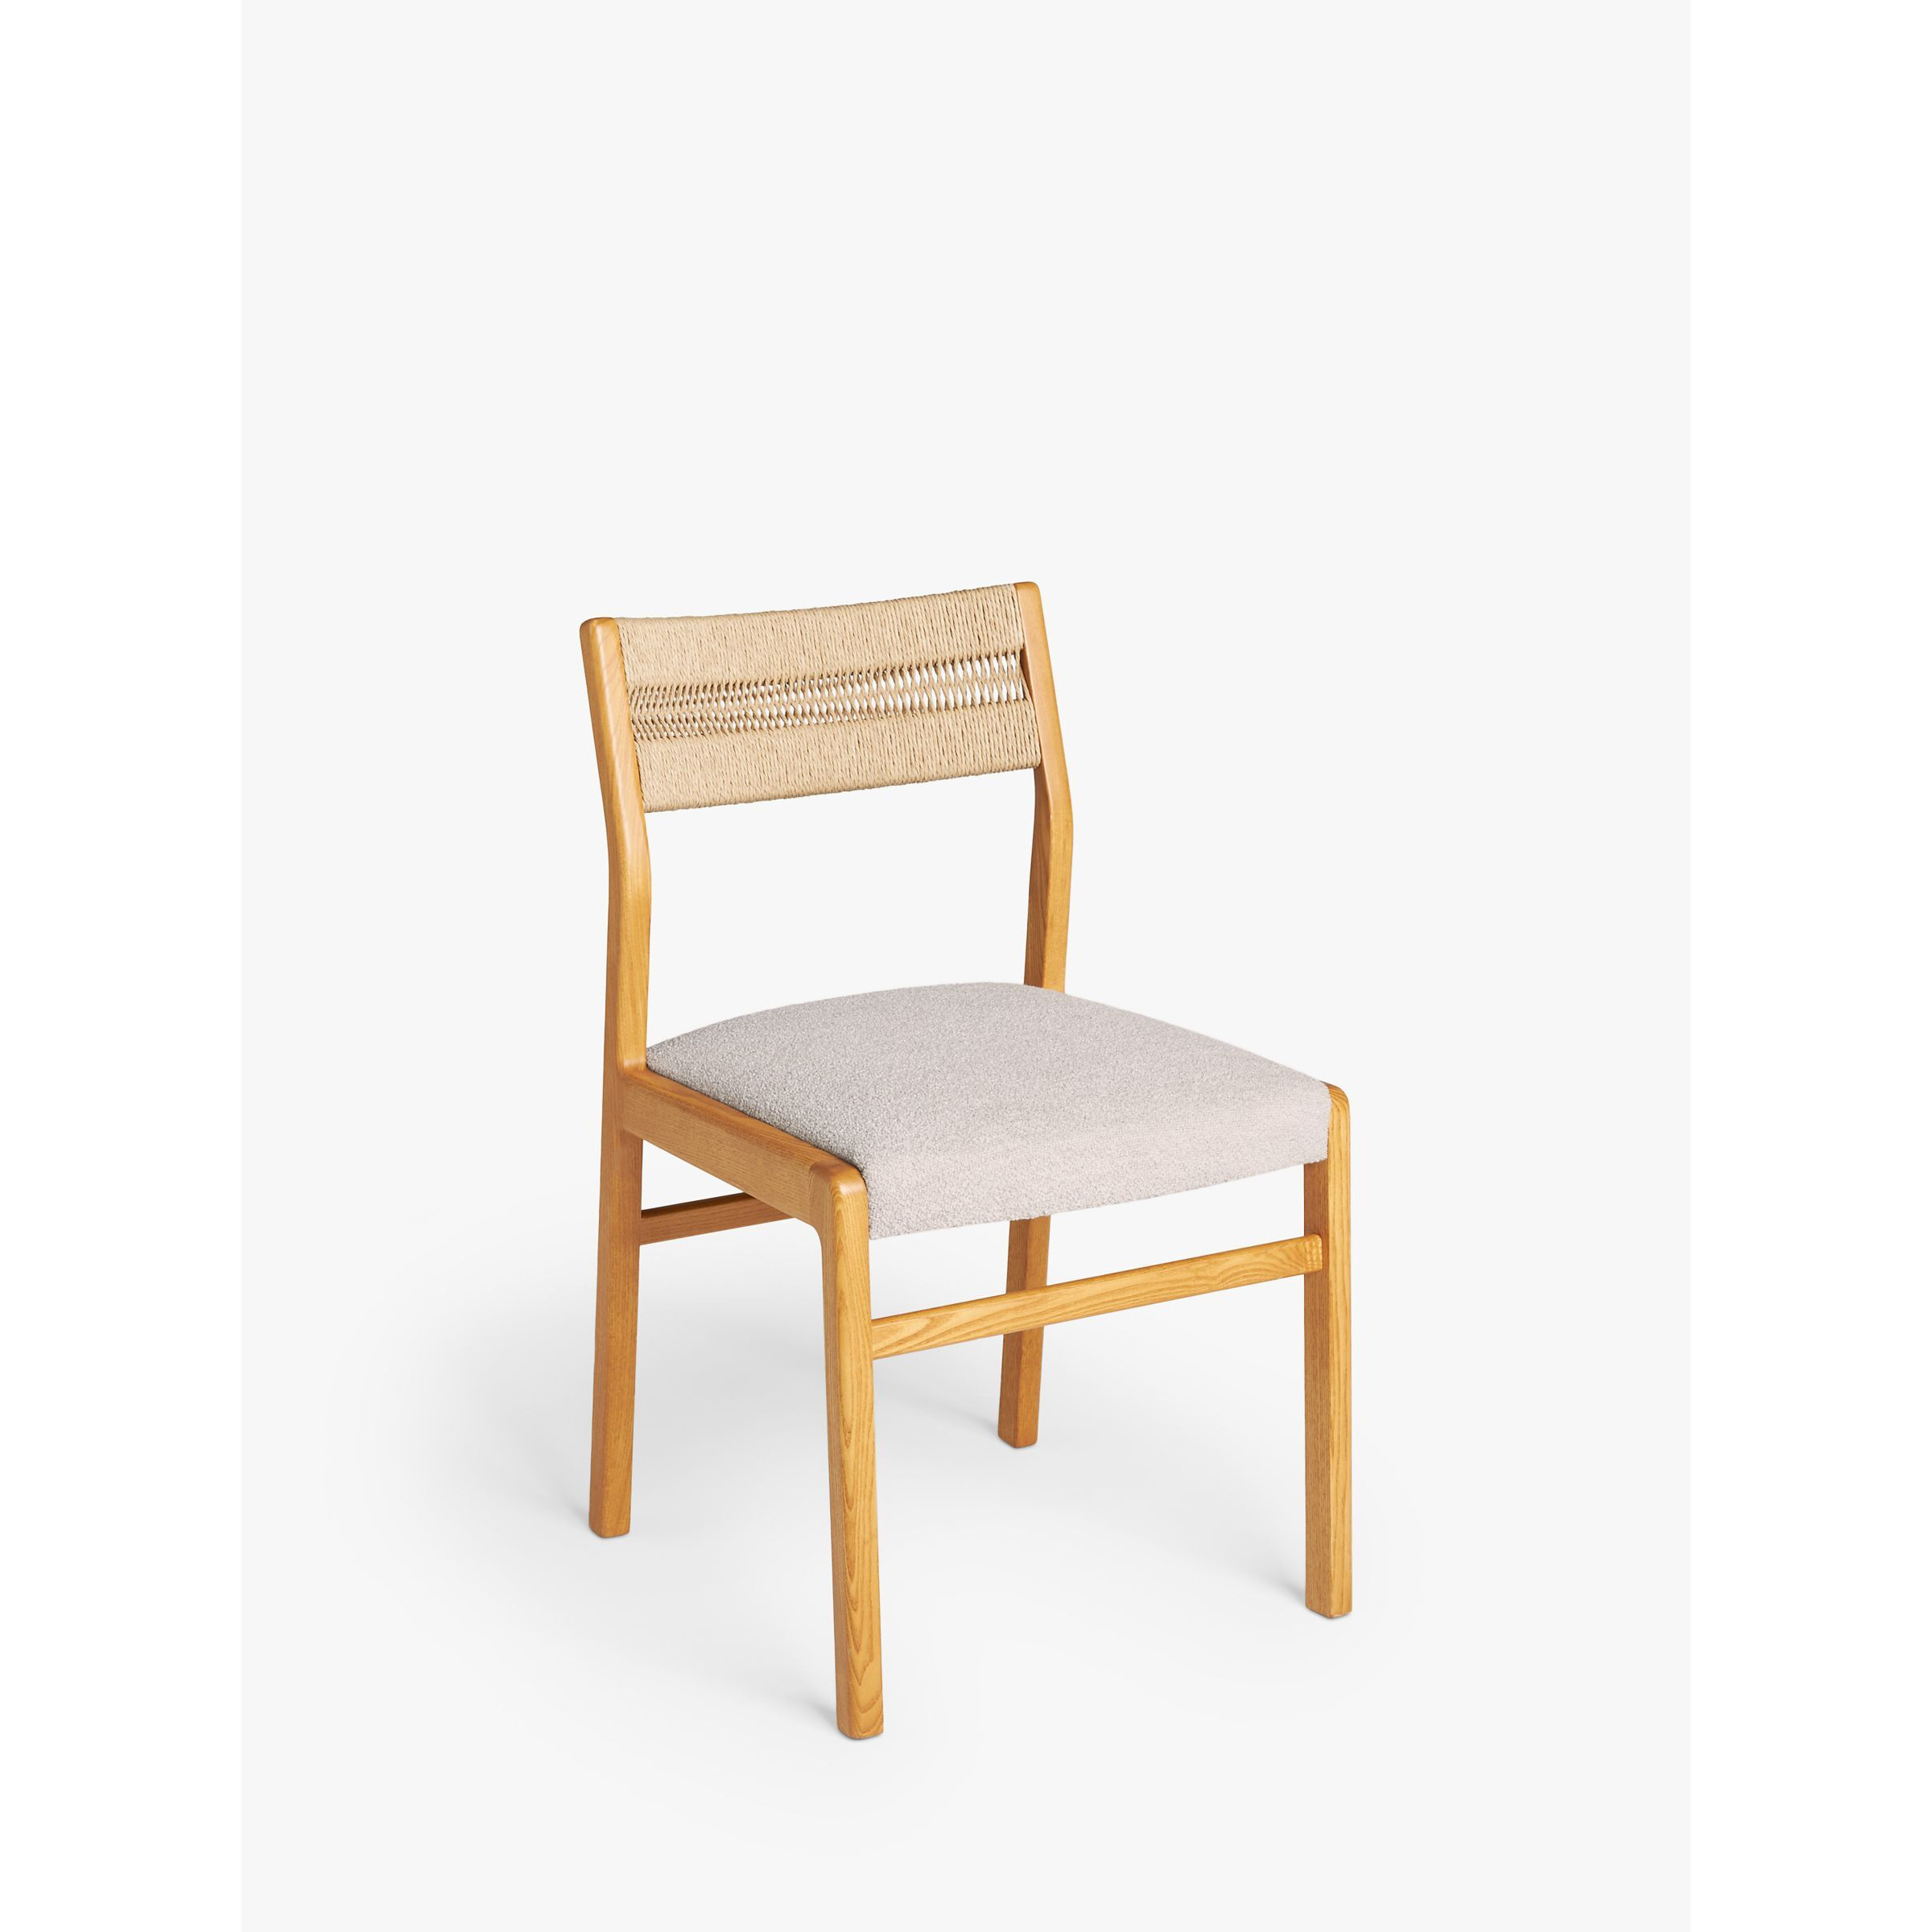 John Lewis Wycombe Rope Back Dining Chair, Ash - image 1